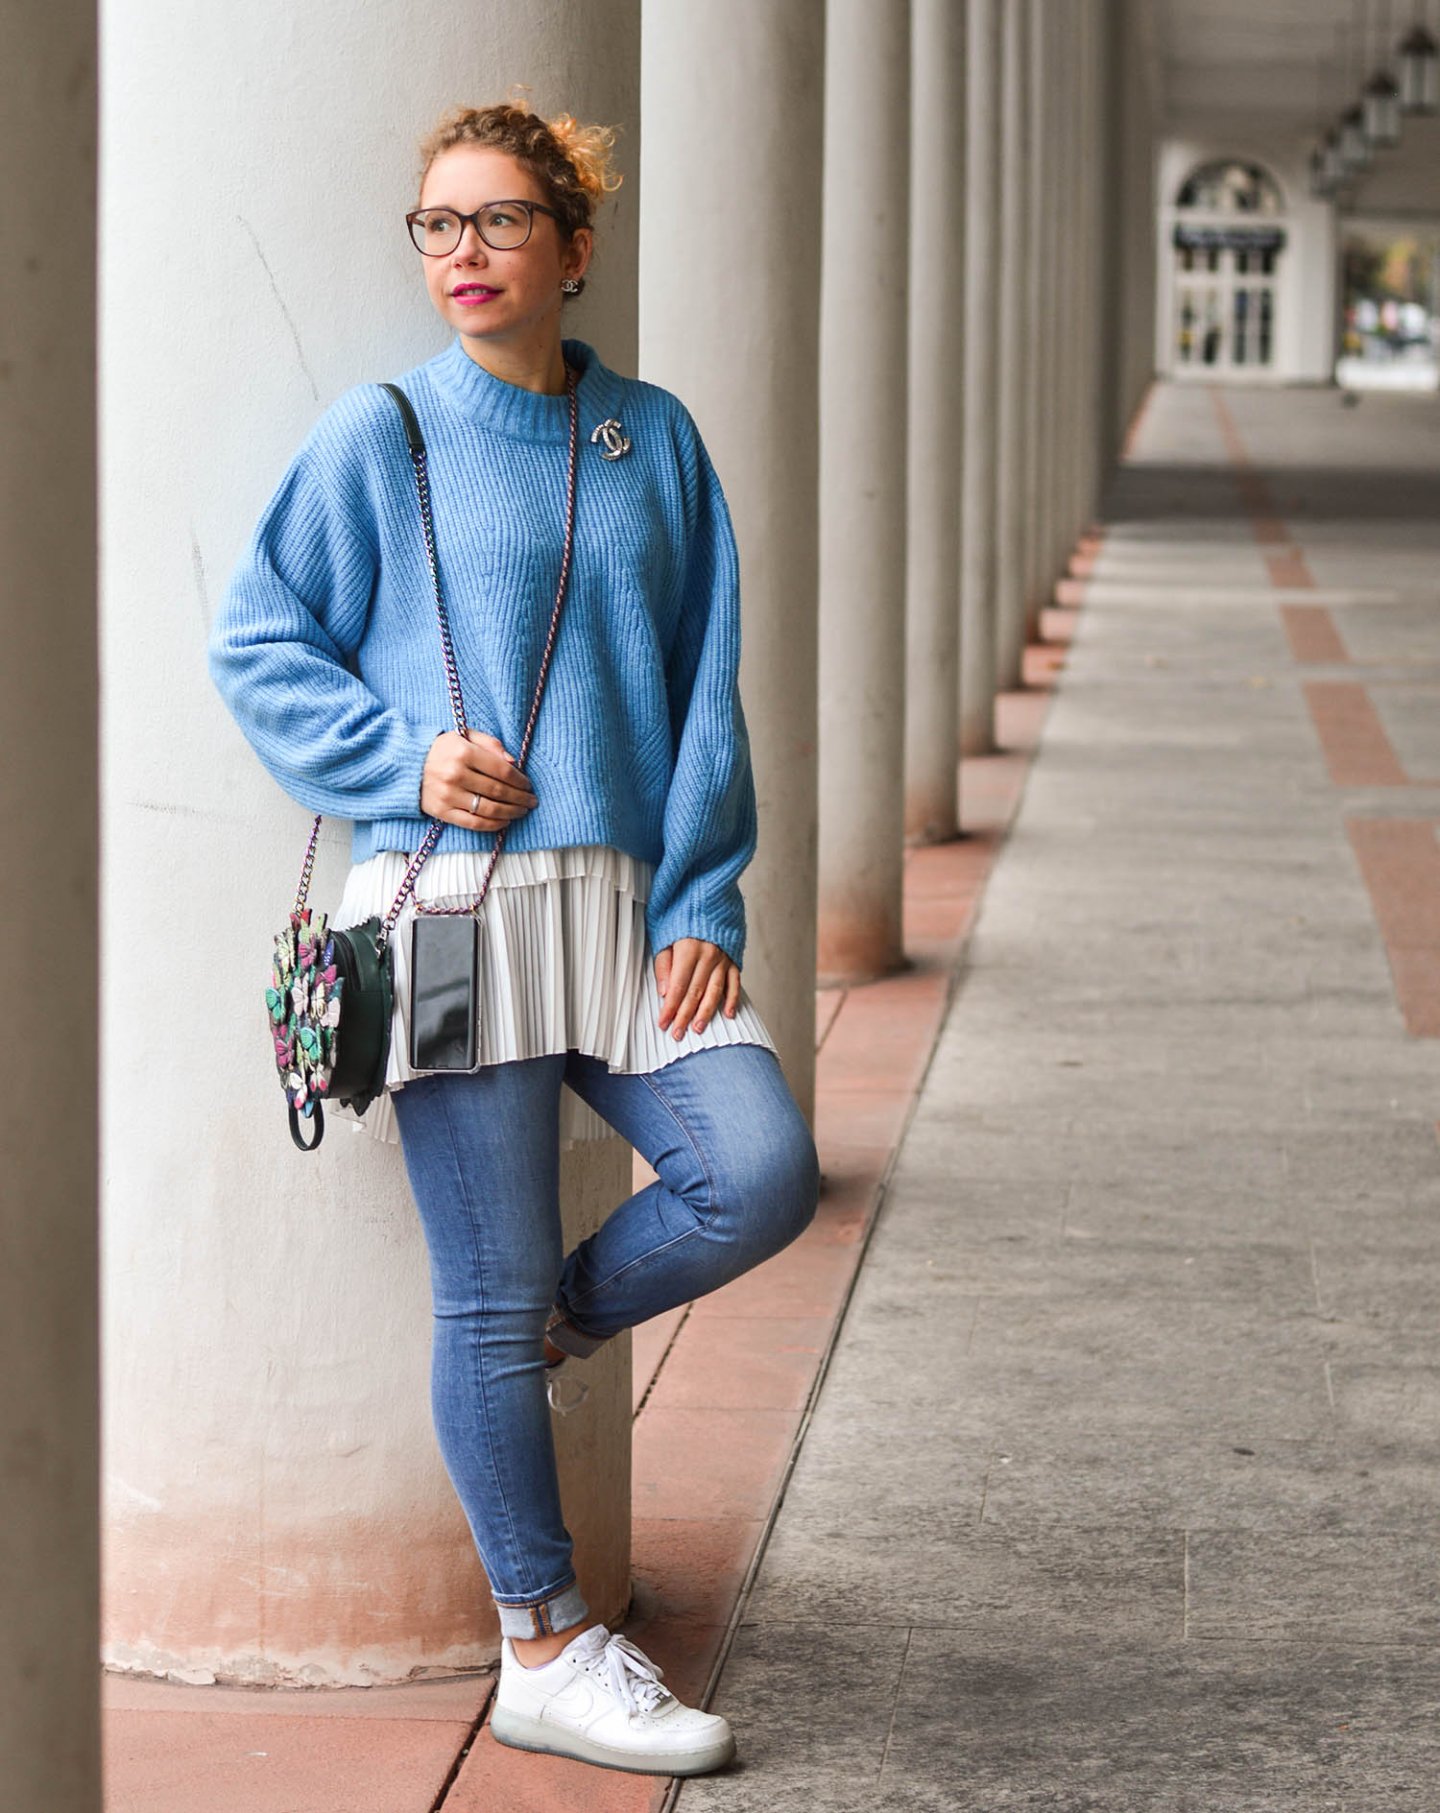 Baby-Blue-Sweater-Longbluse-Nike-Sneakers-Casual-Winter-Outfit-Kationette-Fashionblogger-Germany